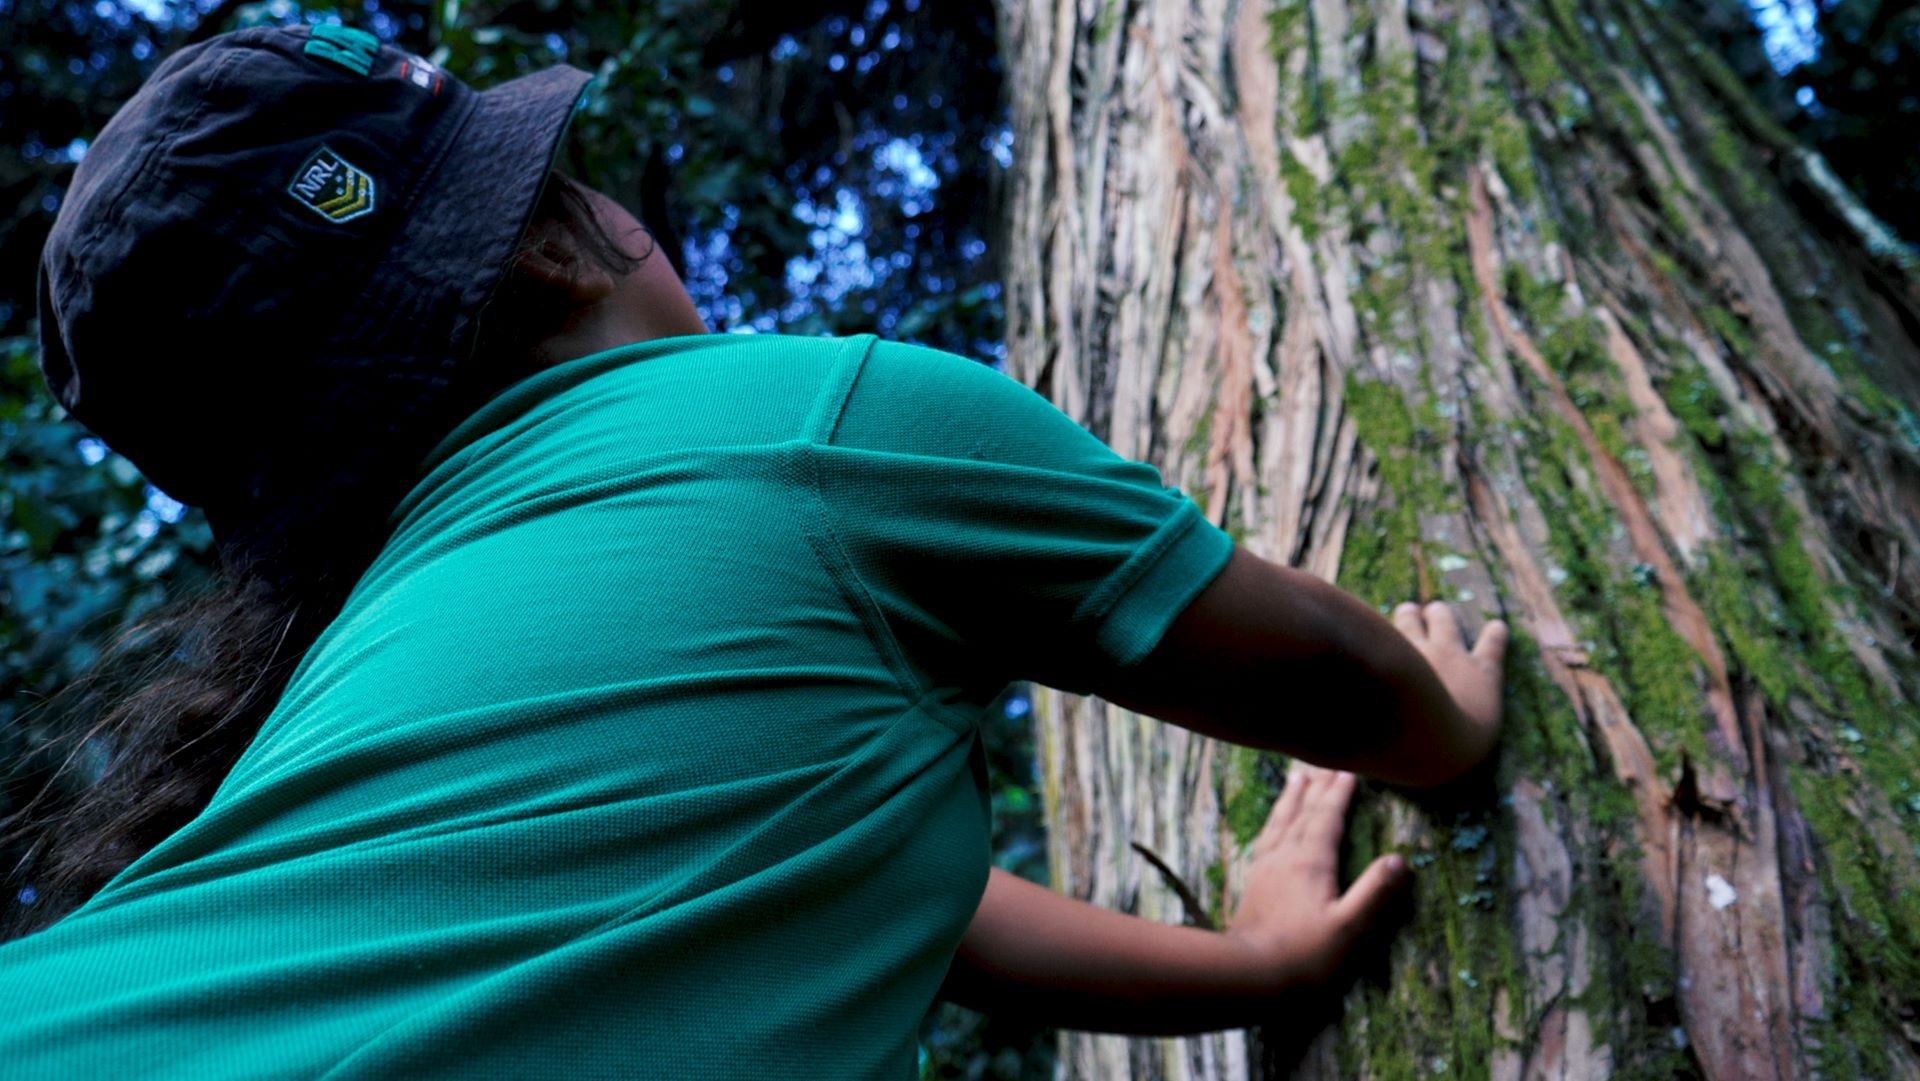 Photo shows closeup of child gazing upwards and touching the trunk of a huge tree.